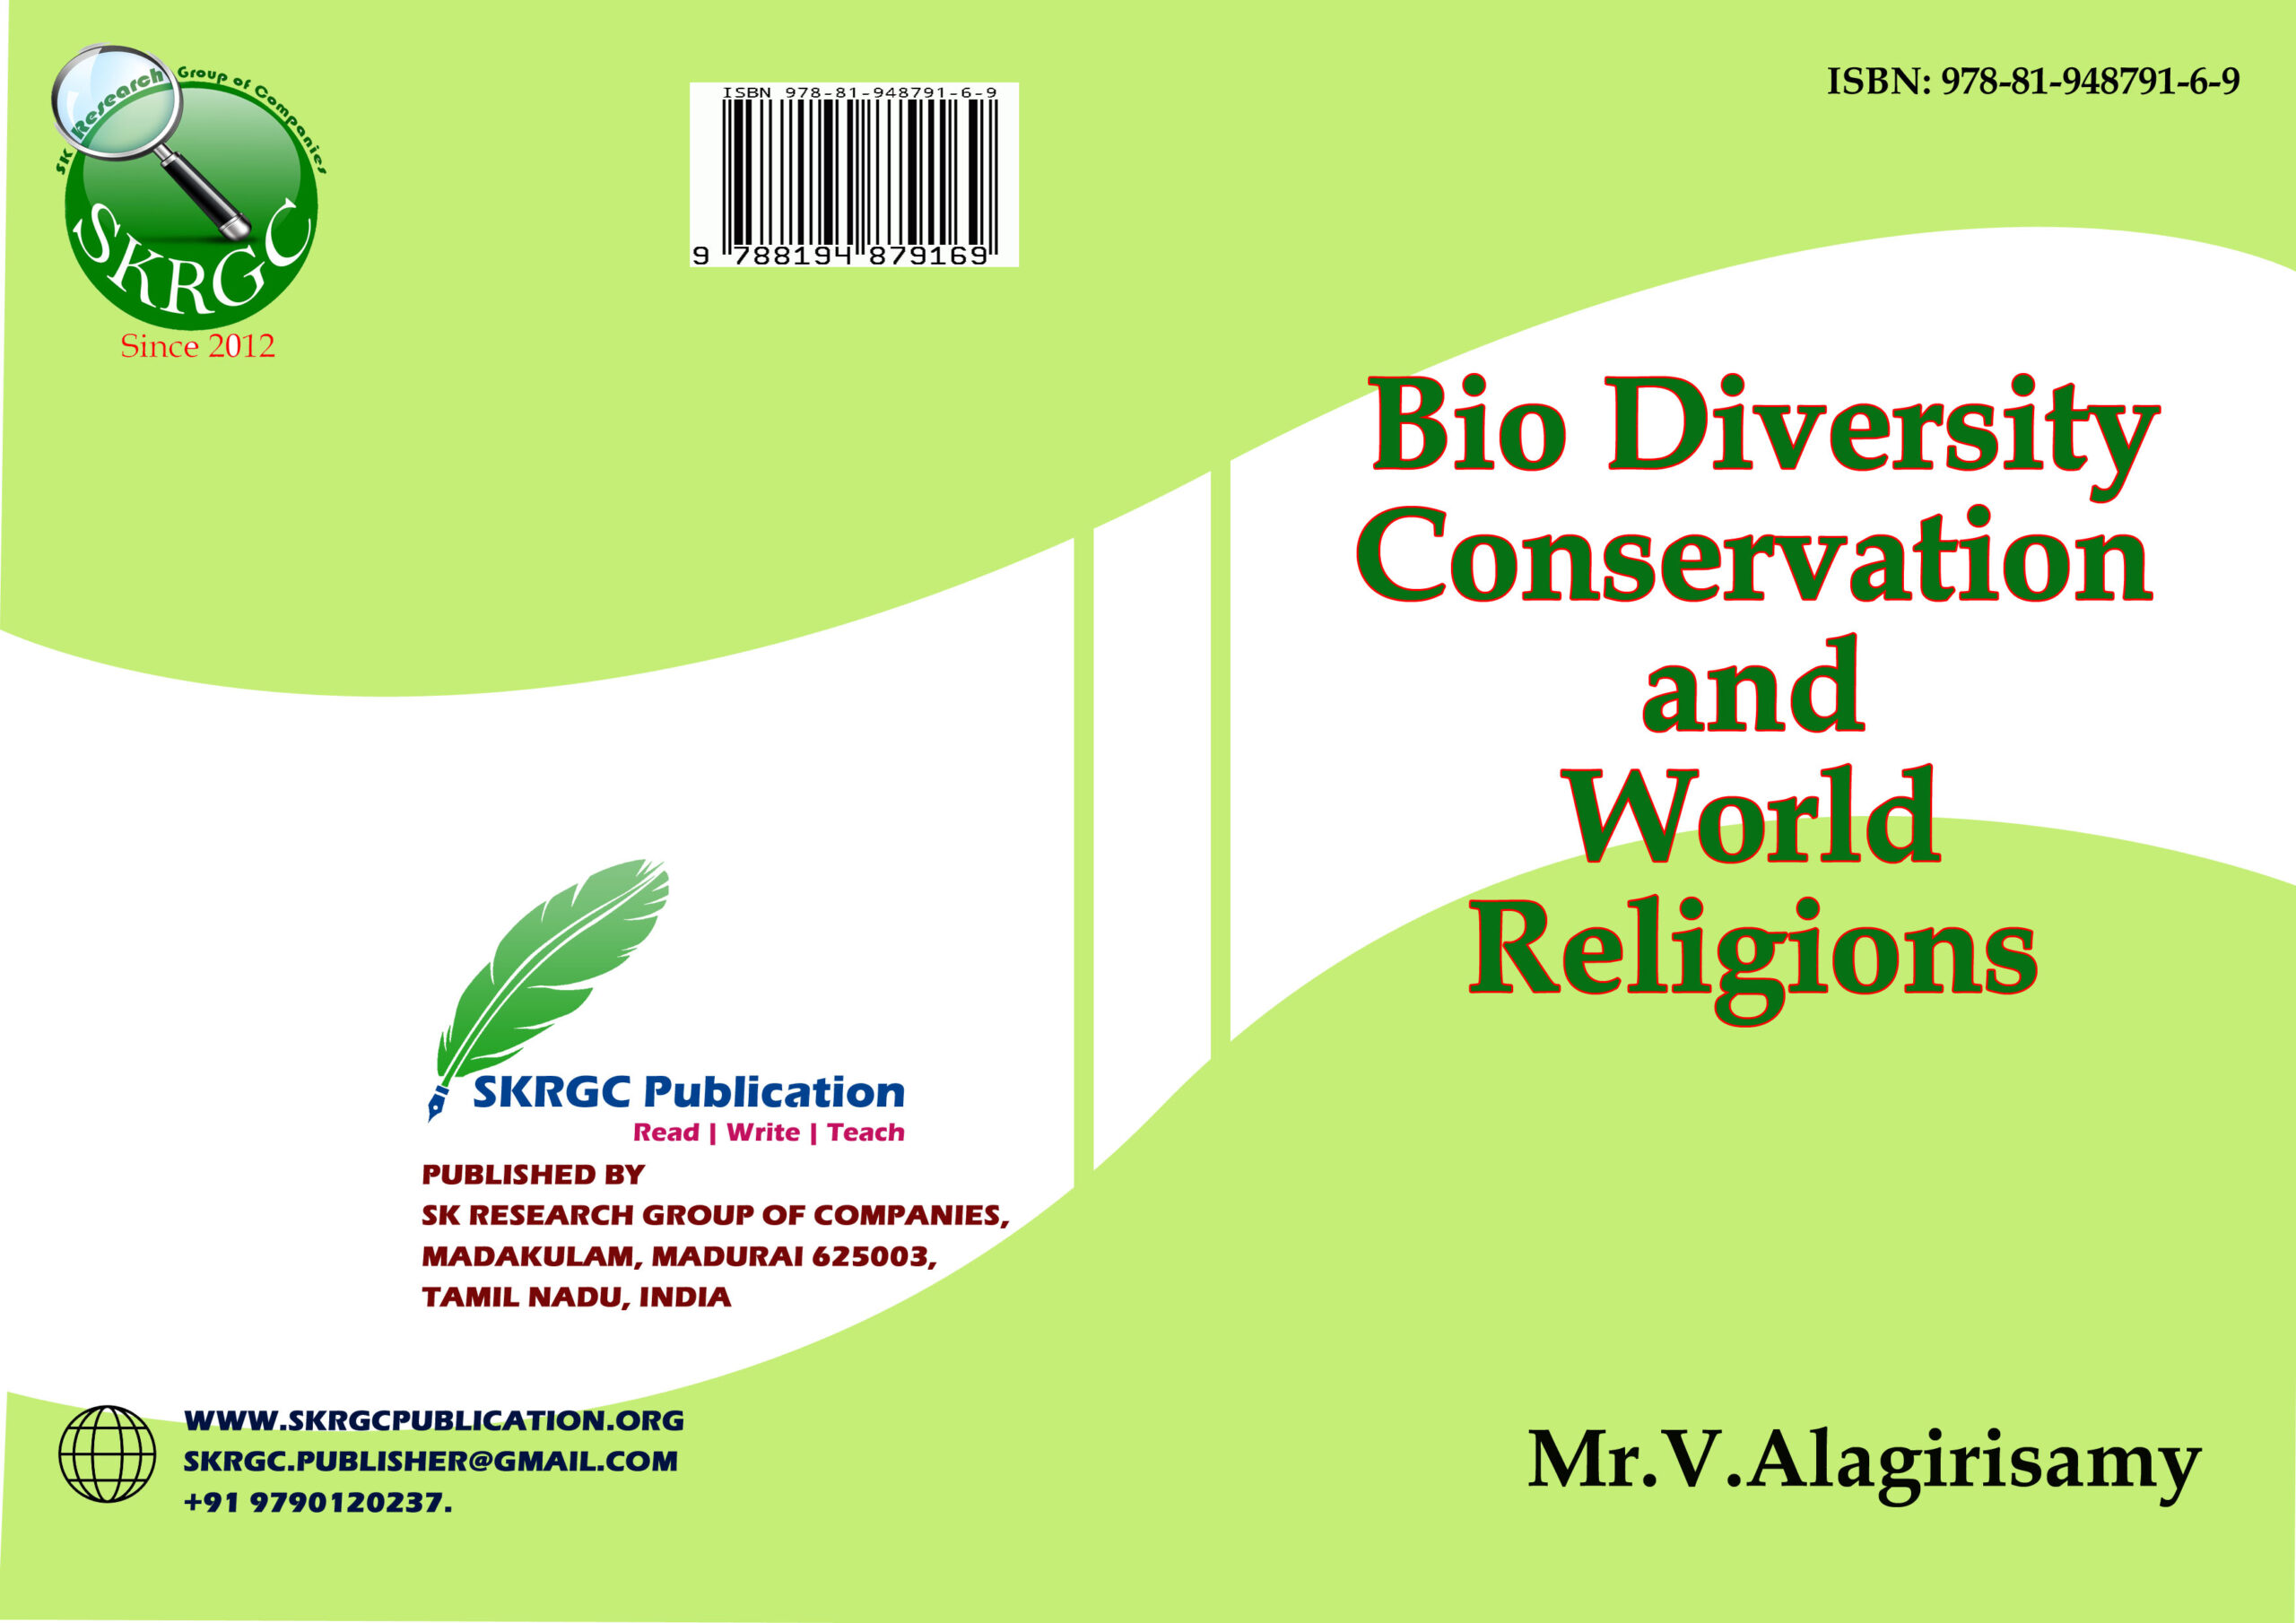 Bio Diversity Conservation and World Religions